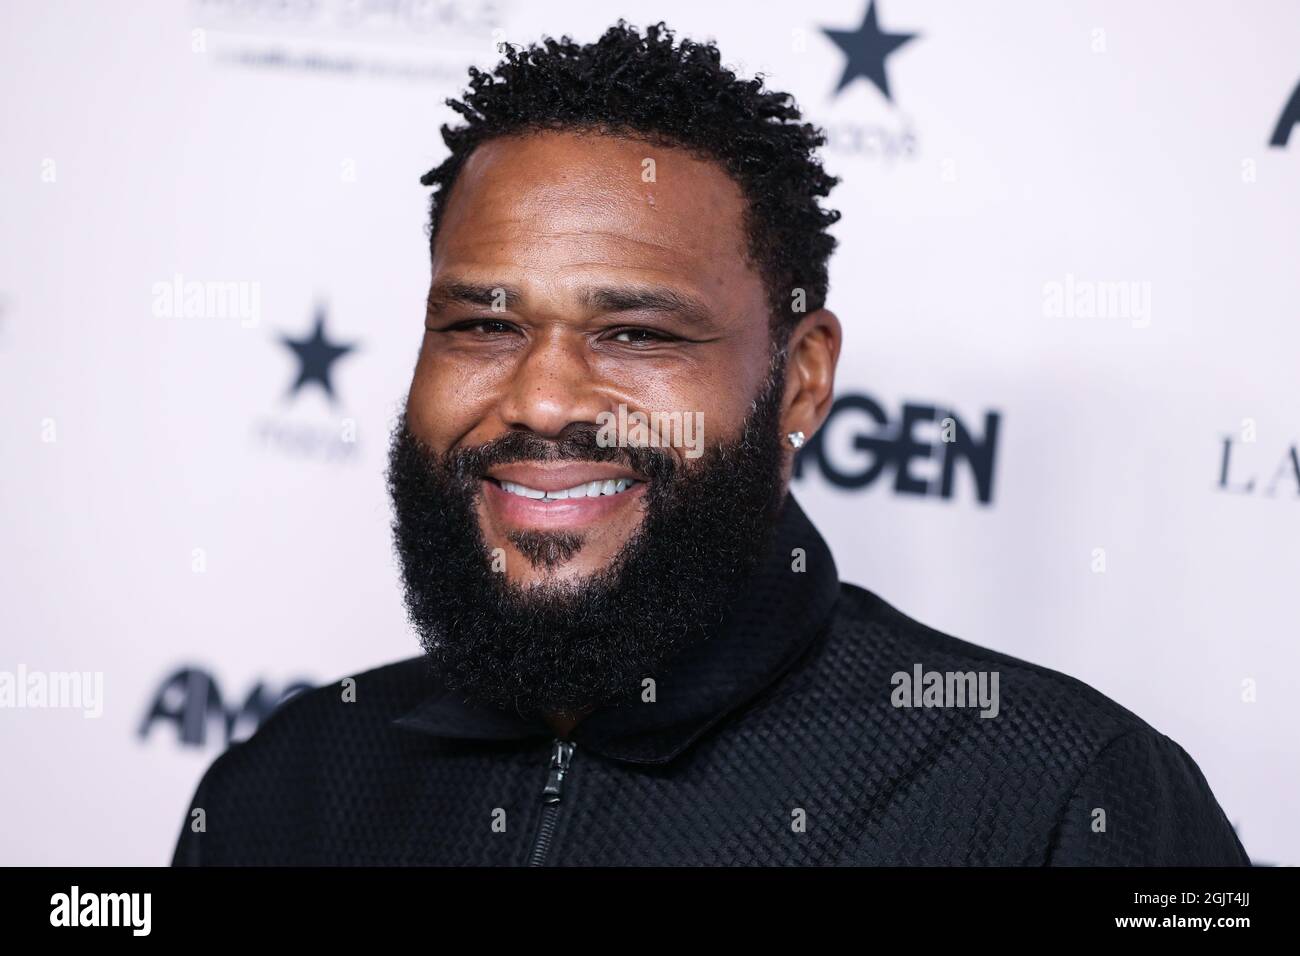 Beverly Hills, United States. 11th Sep, 2021. BEVERLY HILLS, LOS ANGELES, CALIFORNIA, USA - SEPTEMBER 11: Actor Anthony Anderson arrives at the 12th Annual LadyLike Foundation Women Of Excellence Awards And Fashion Show held at The Beverly Hilton Hotel on September 11, 2021 in Beverly Hills, Los Angeles, California, United States. (Photo by Xavier Collin/Image Press Agency/Sipa USA) Credit: Sipa USA/Alamy Live News Stock Photo